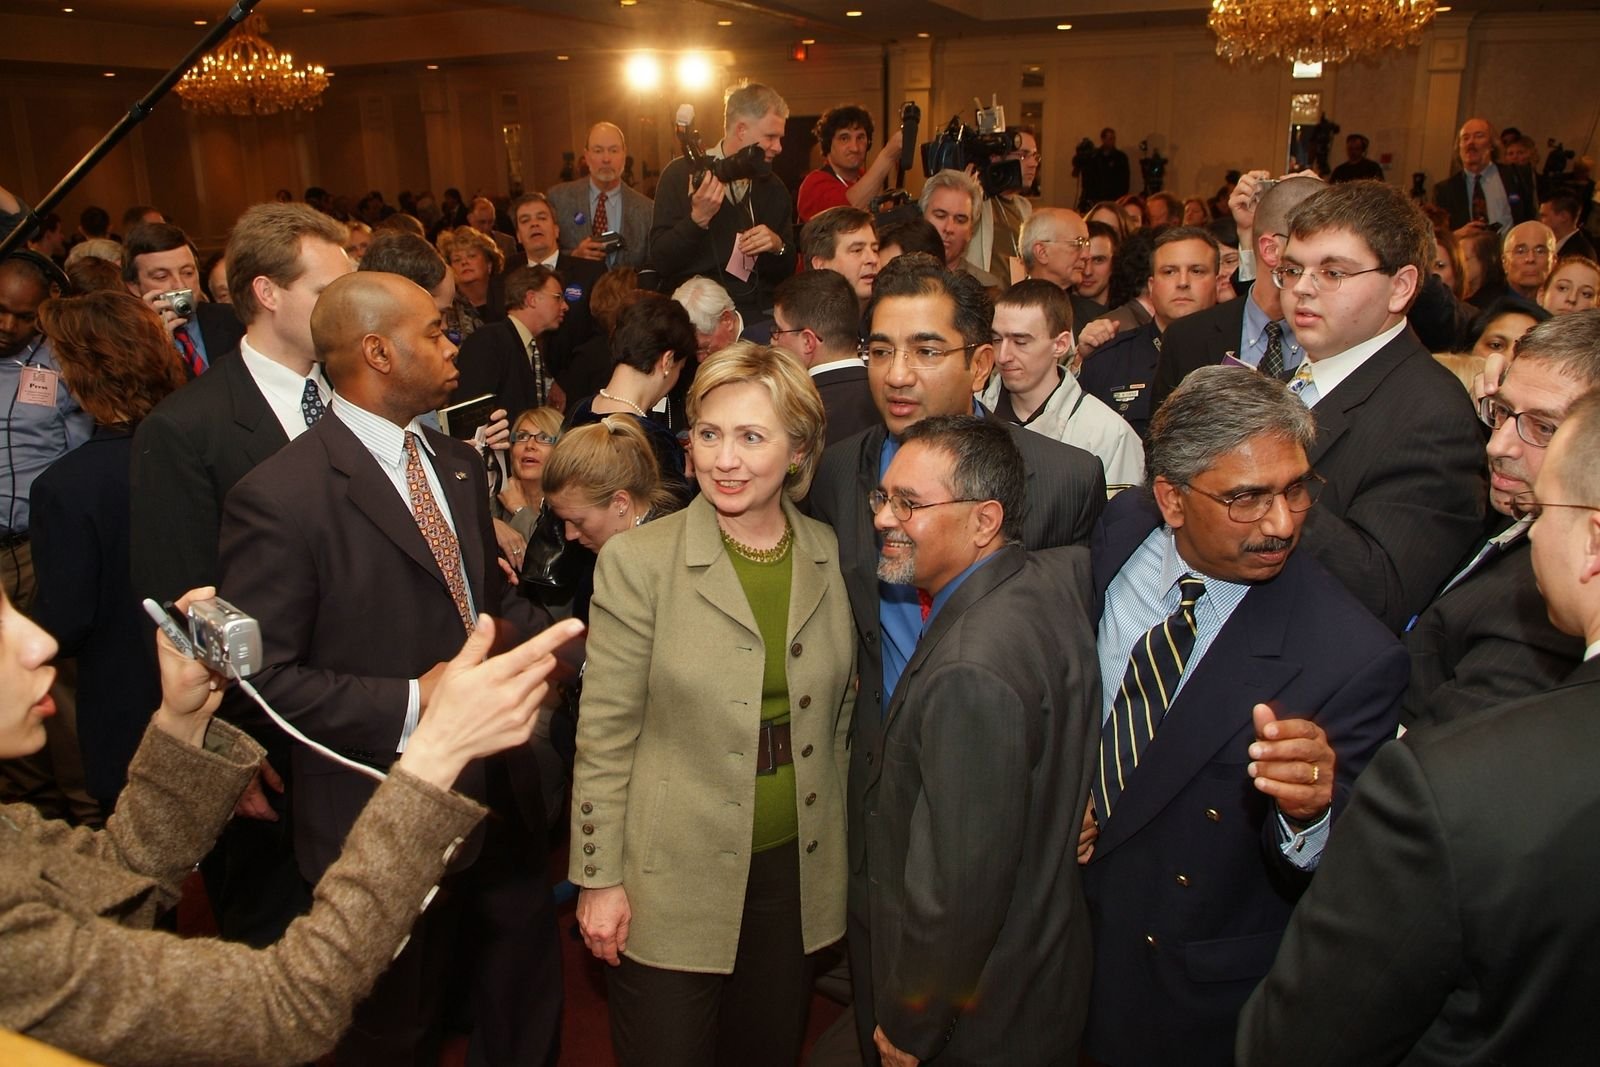 nh group picture with hillary.jpg